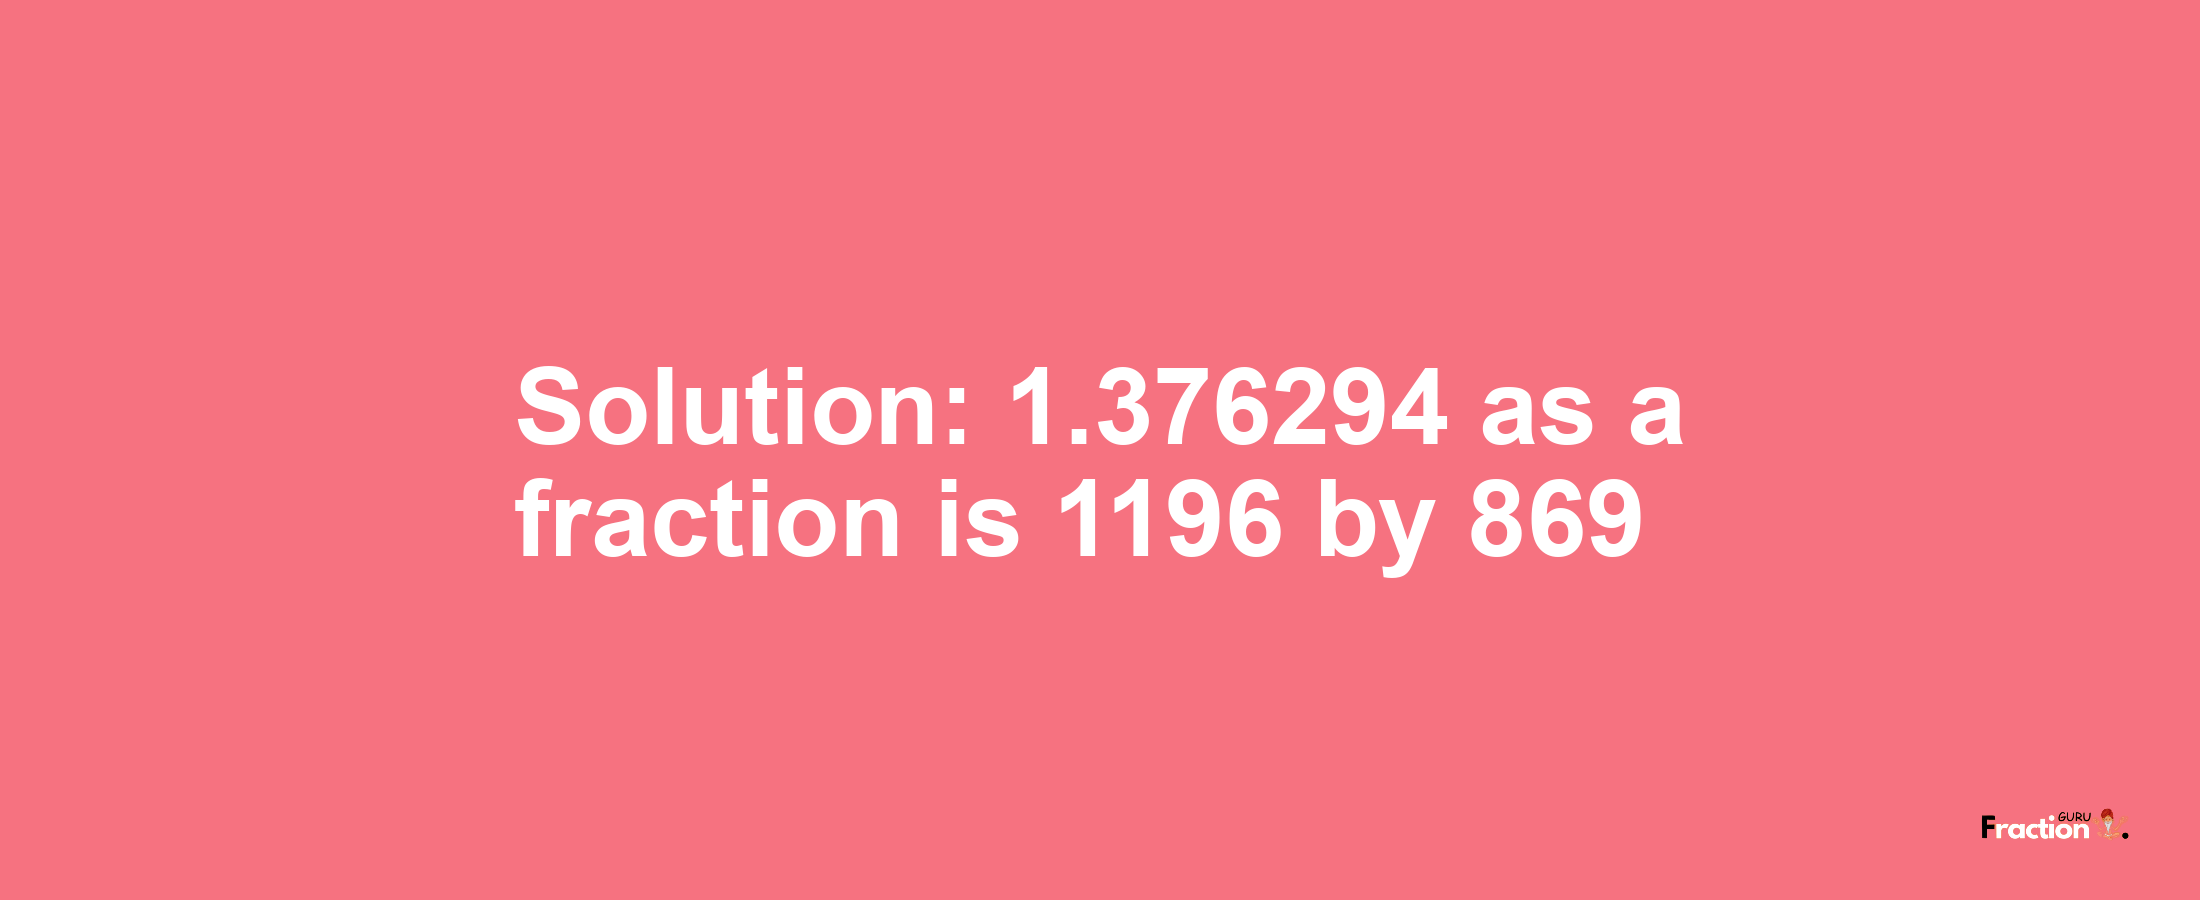 Solution:1.376294 as a fraction is 1196/869